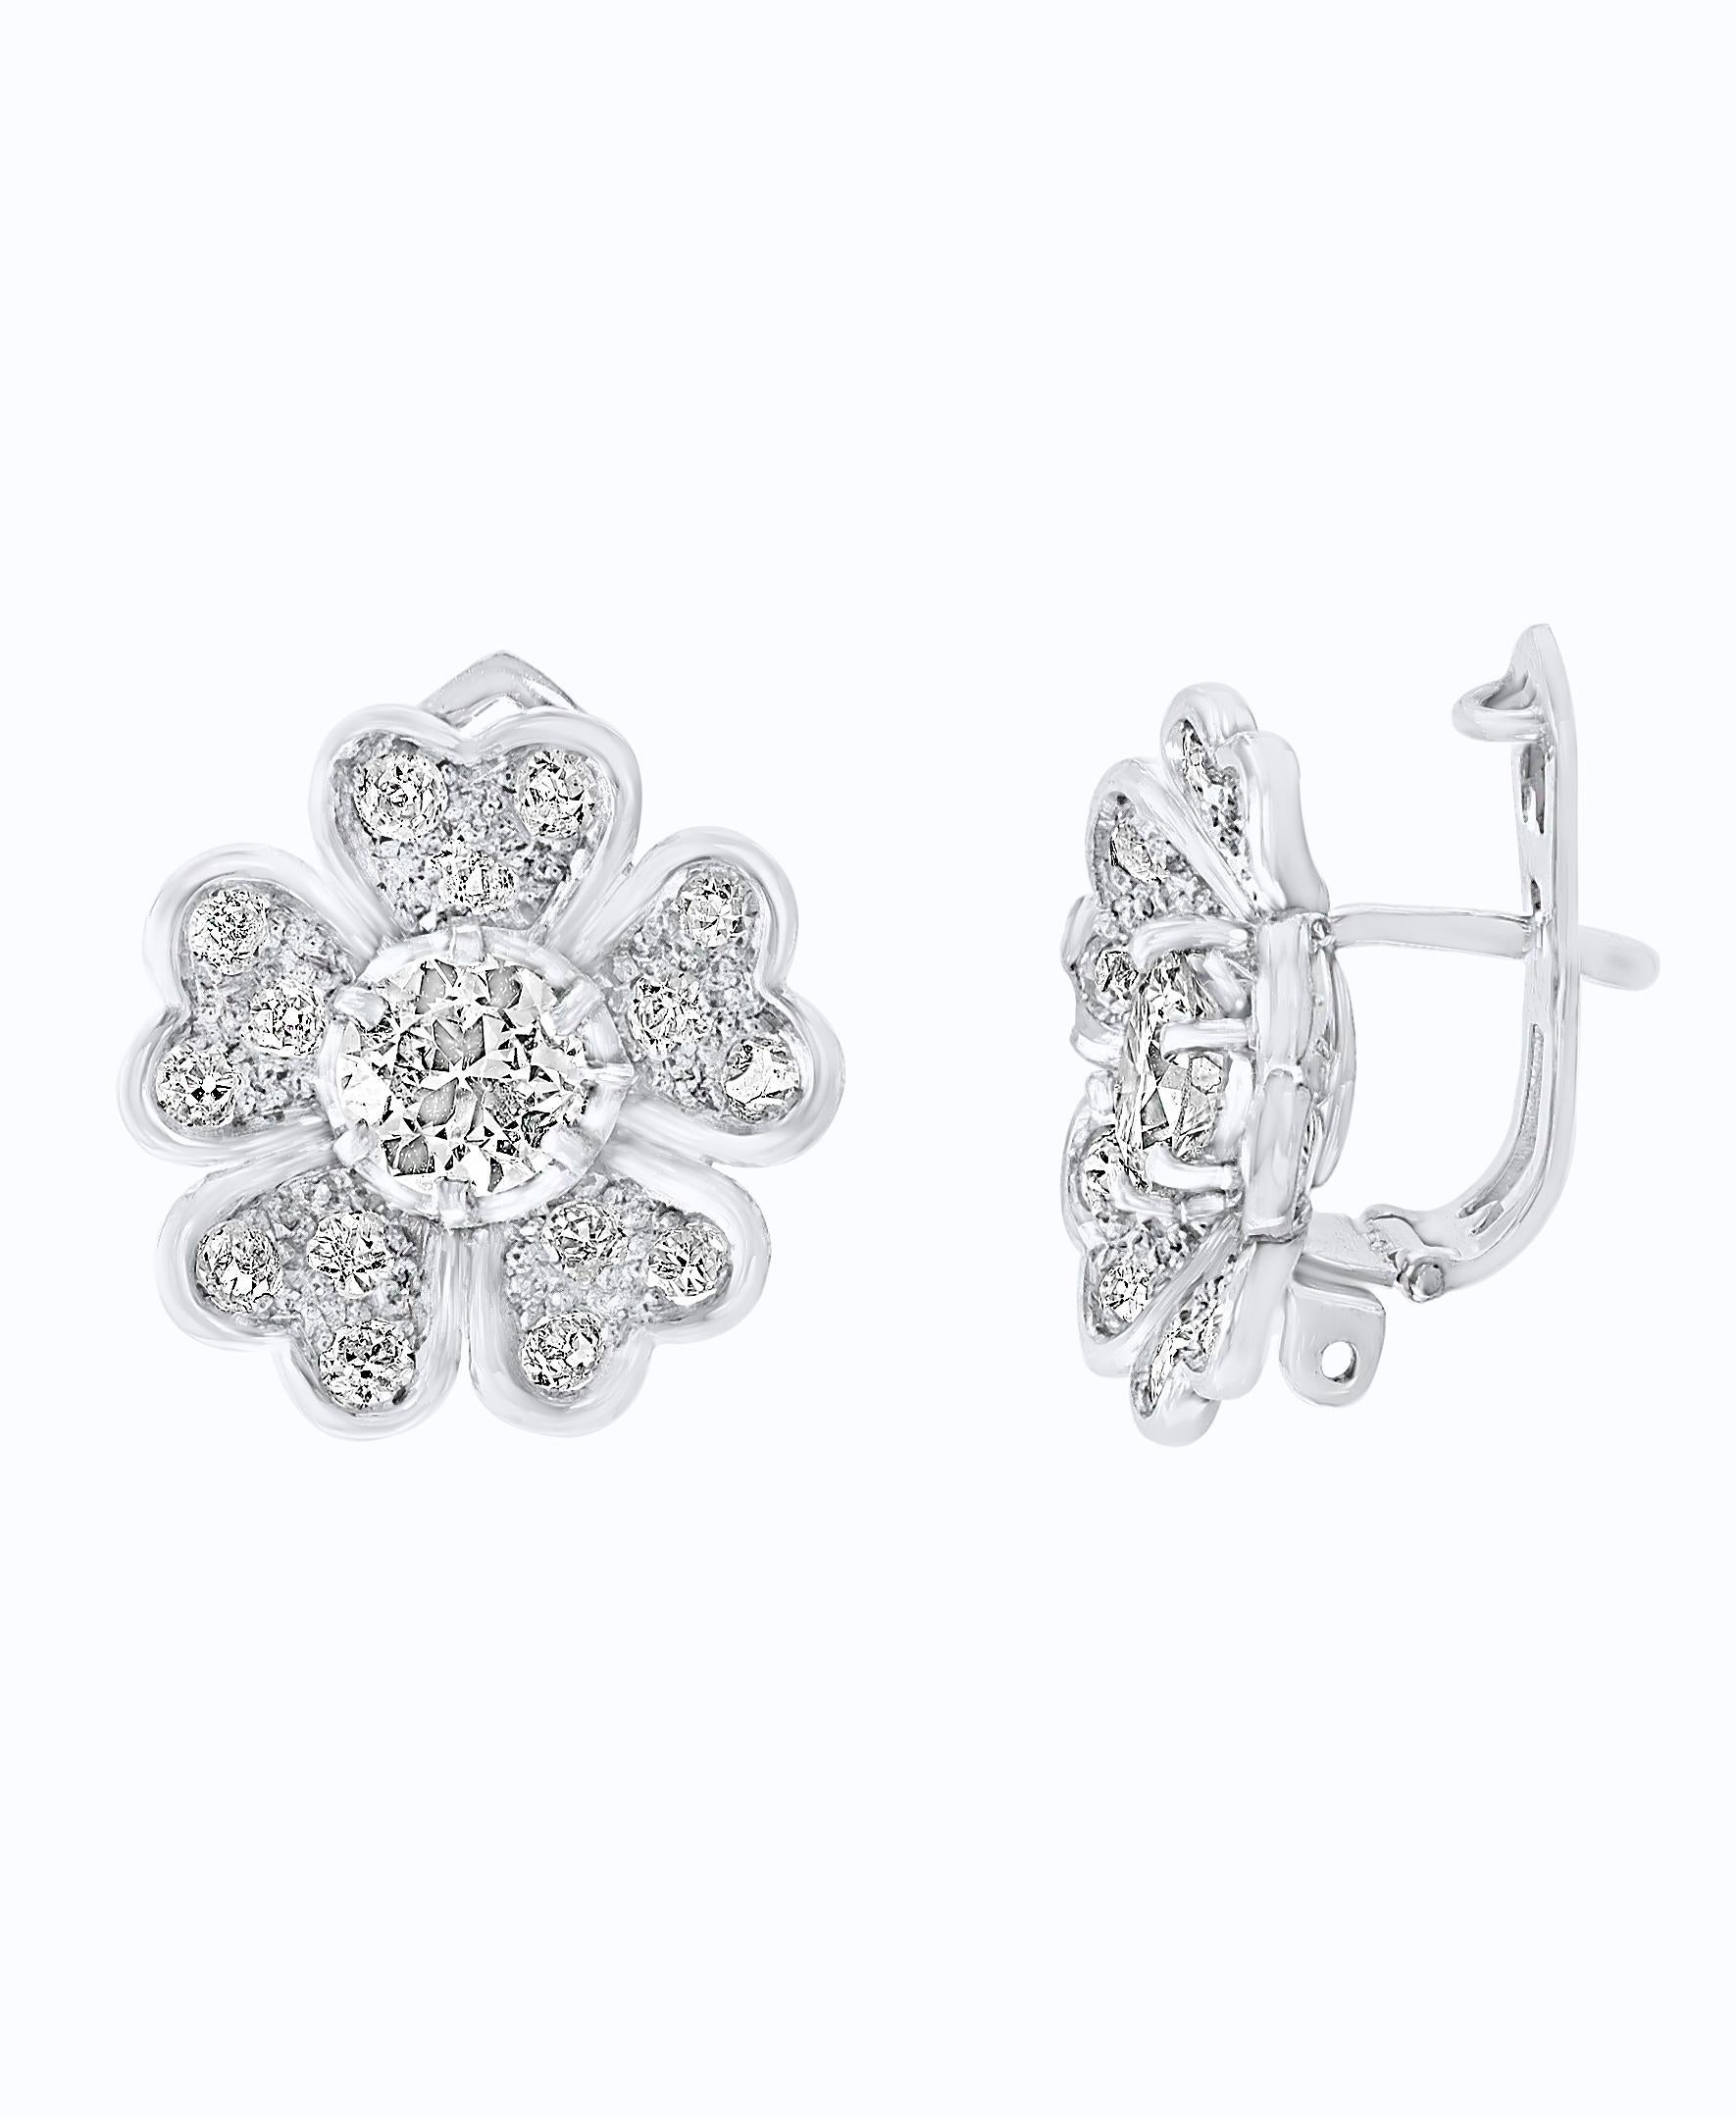 Round Cut AGI Certified 2 Ct Diamond VS Quality Flower/Cluster Earring Platinum 0.7 Carat  For Sale